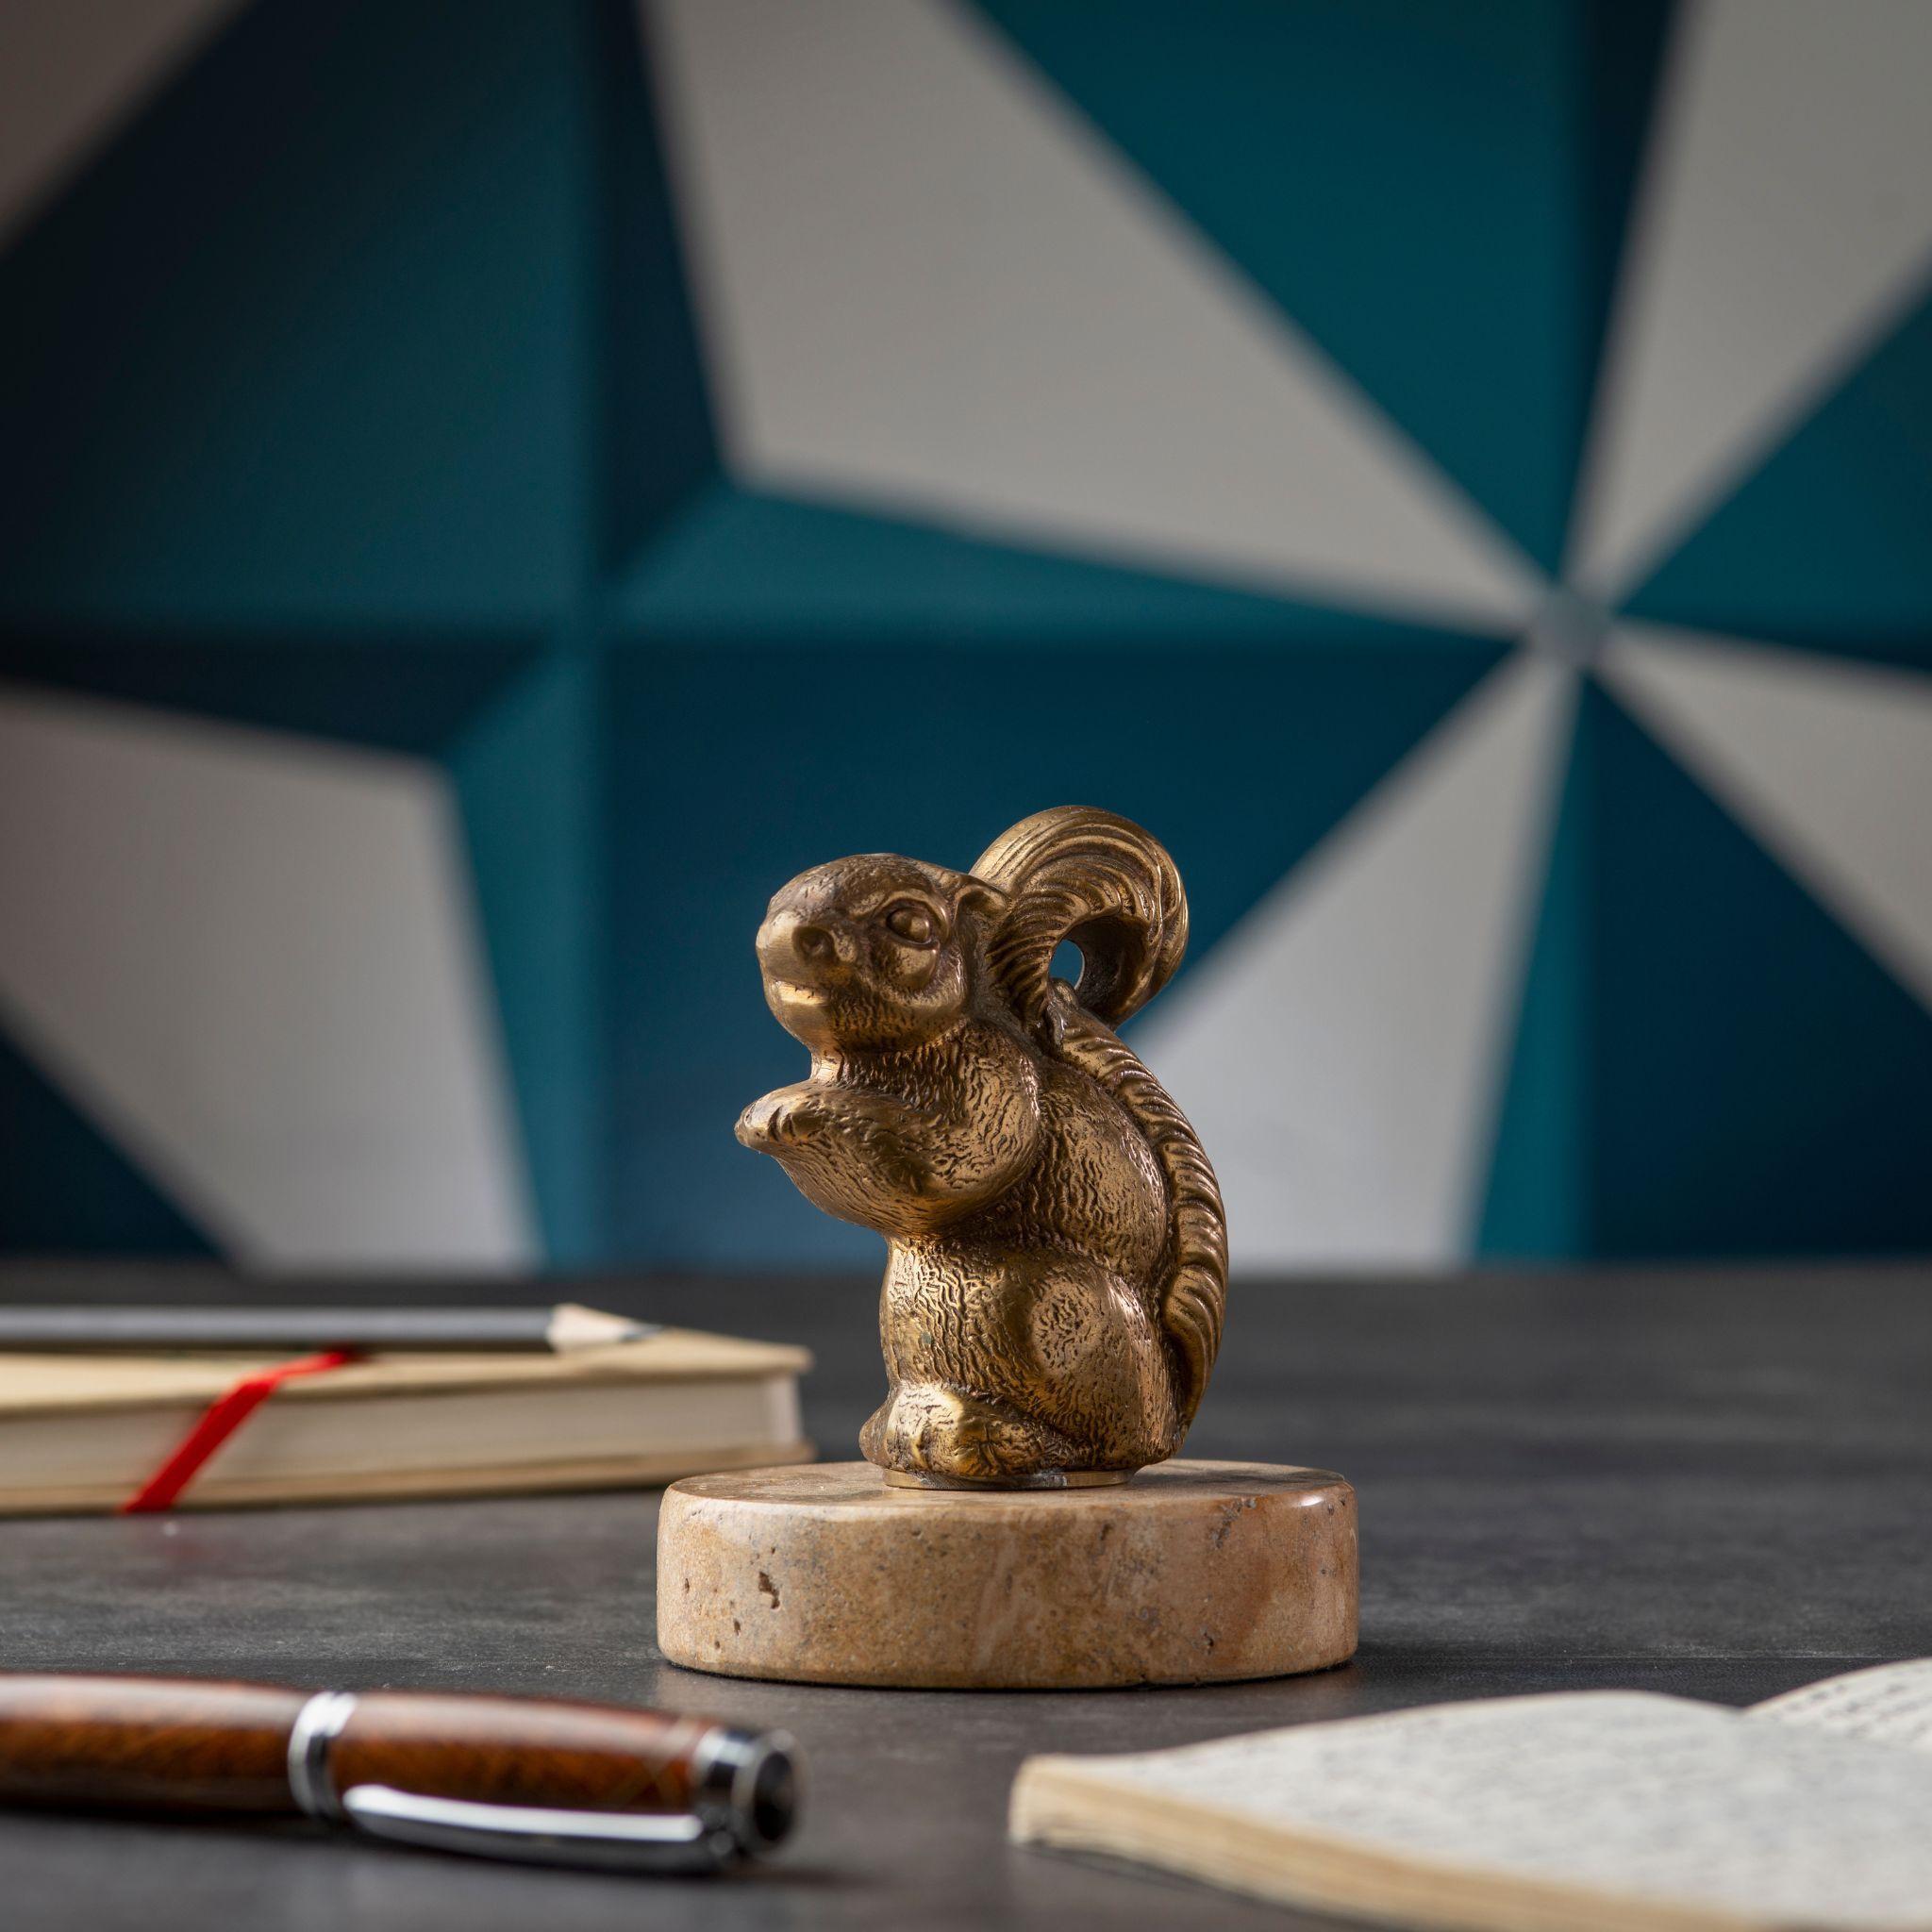 Bring a touch of nature to your home with the elegant brass squirrel with marble base. This beautiful piece features a brass squirrel figurine perched on a sturdy marble base, making it a stunning addition to any room in your home. The intricate